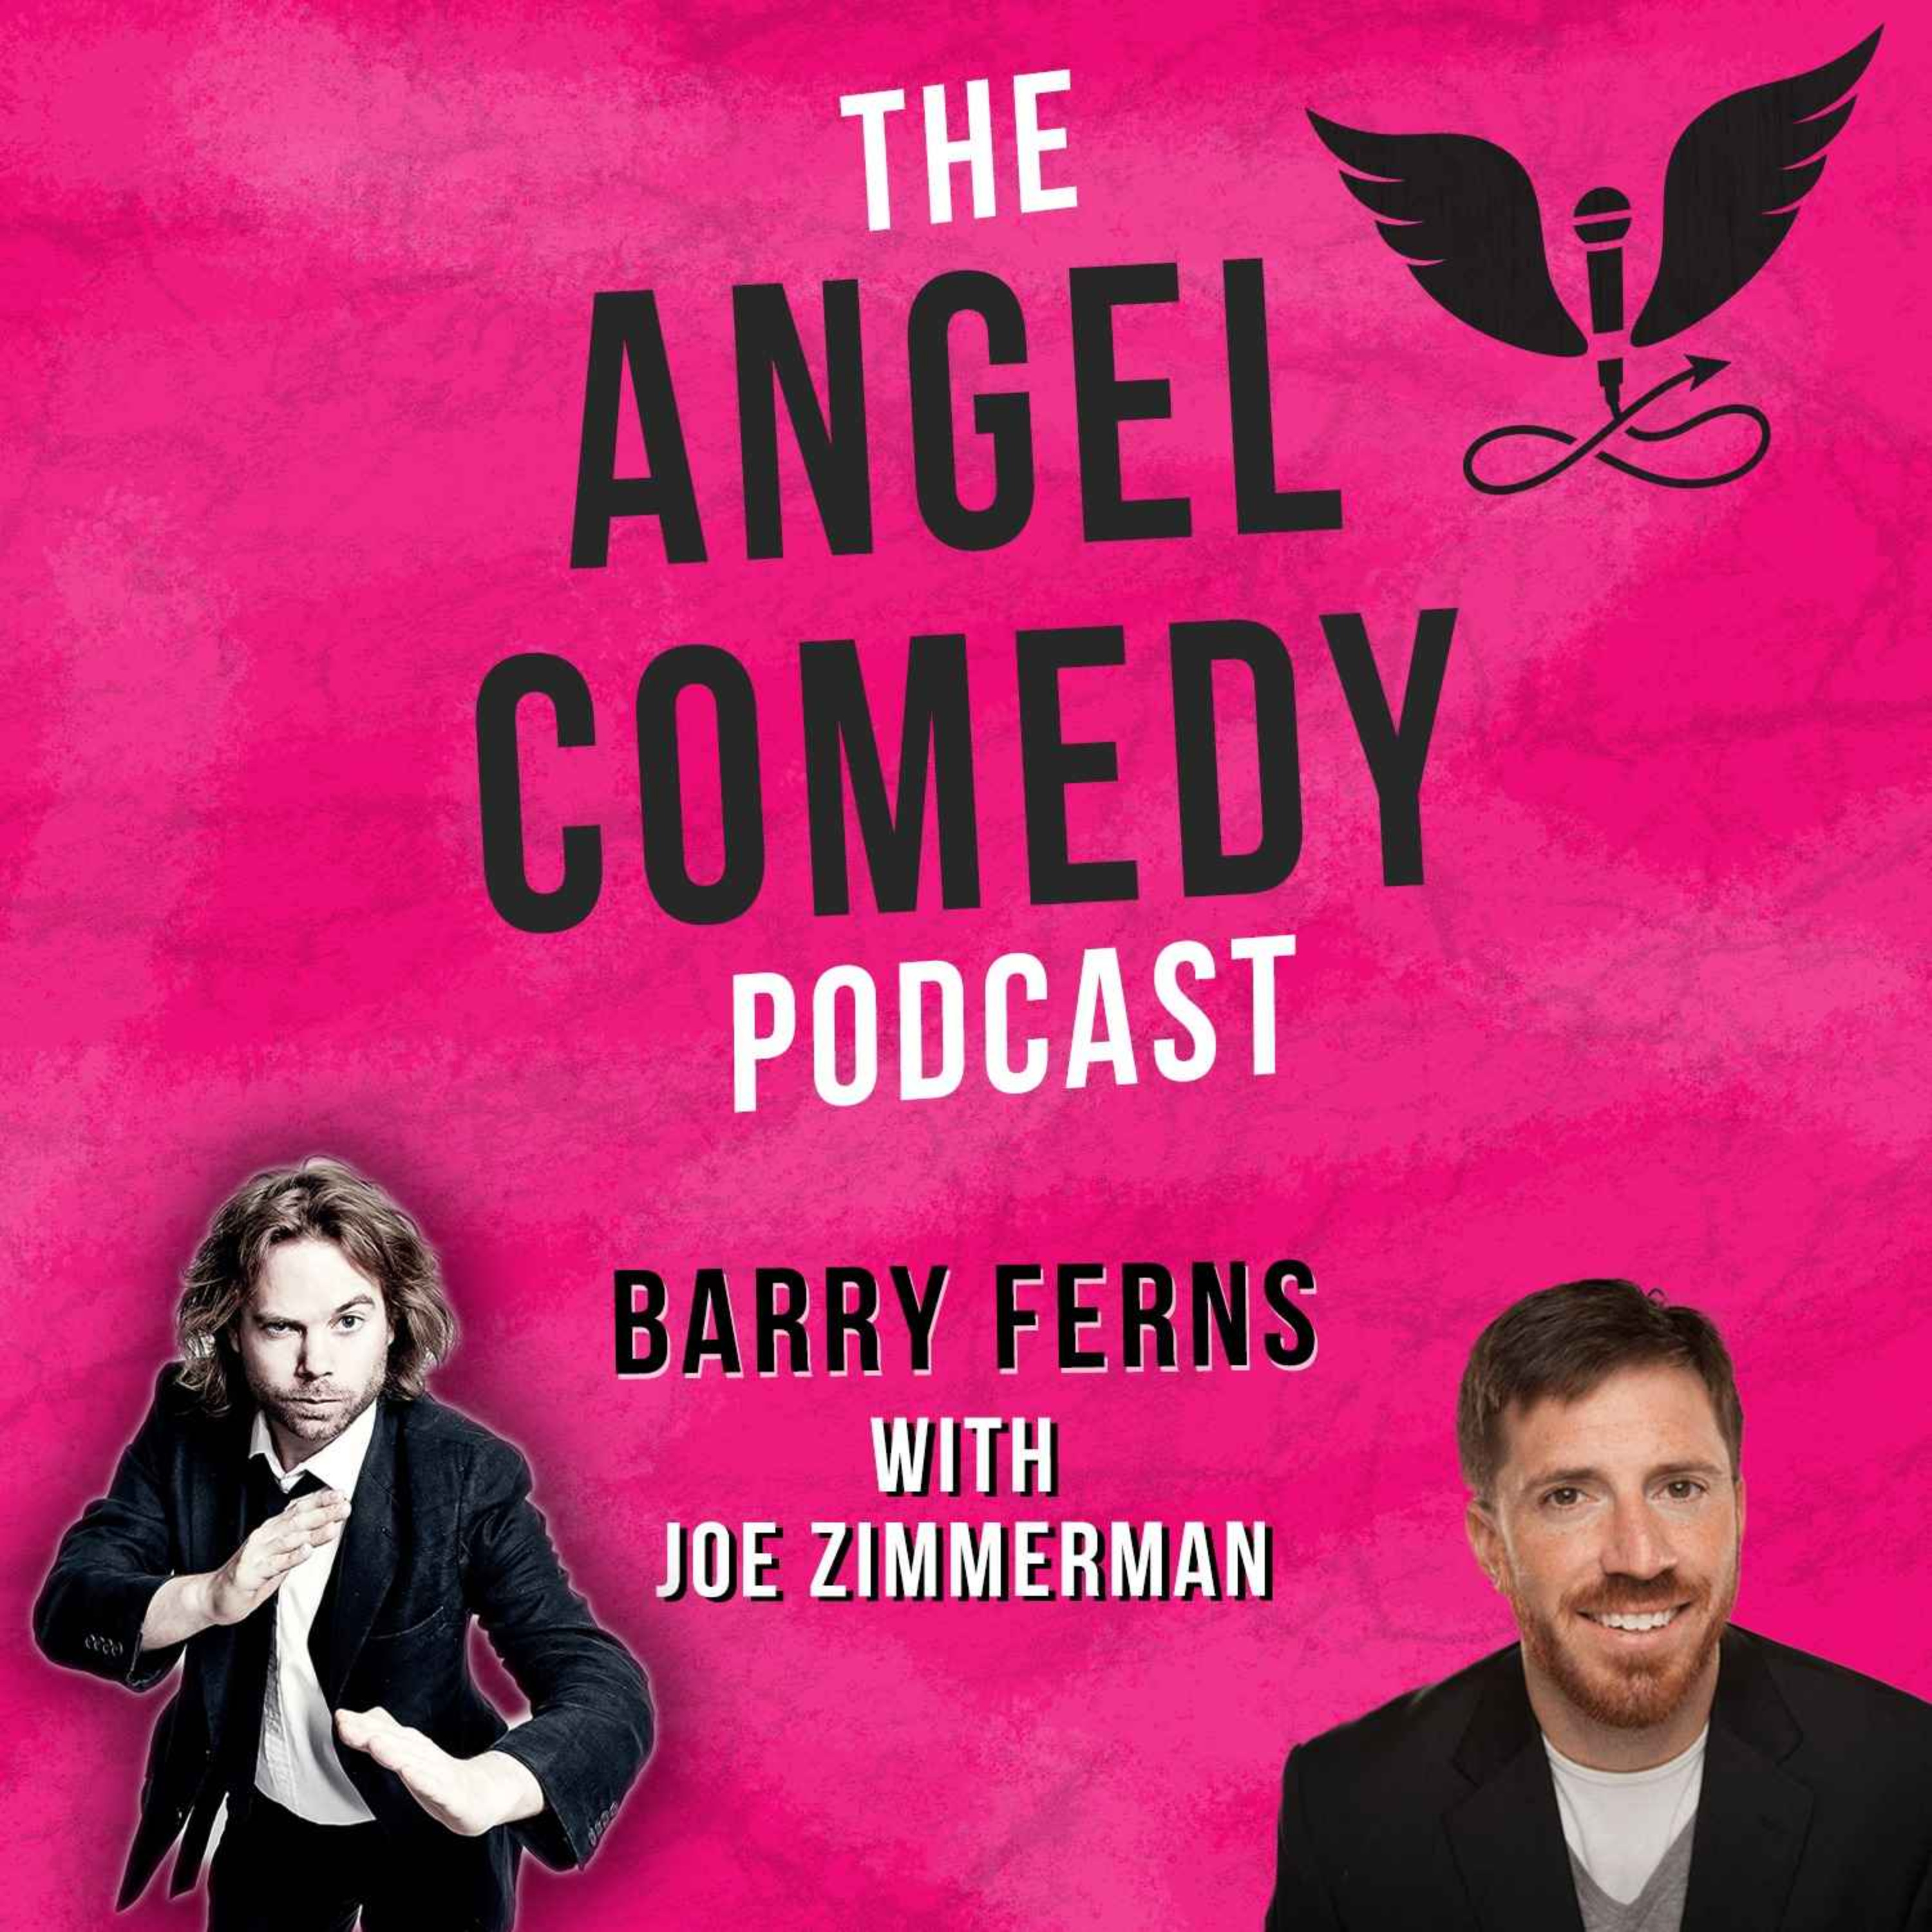 Podcast: The Angel Comedy Podcast with Joe Zimmerman - Angel Comedy